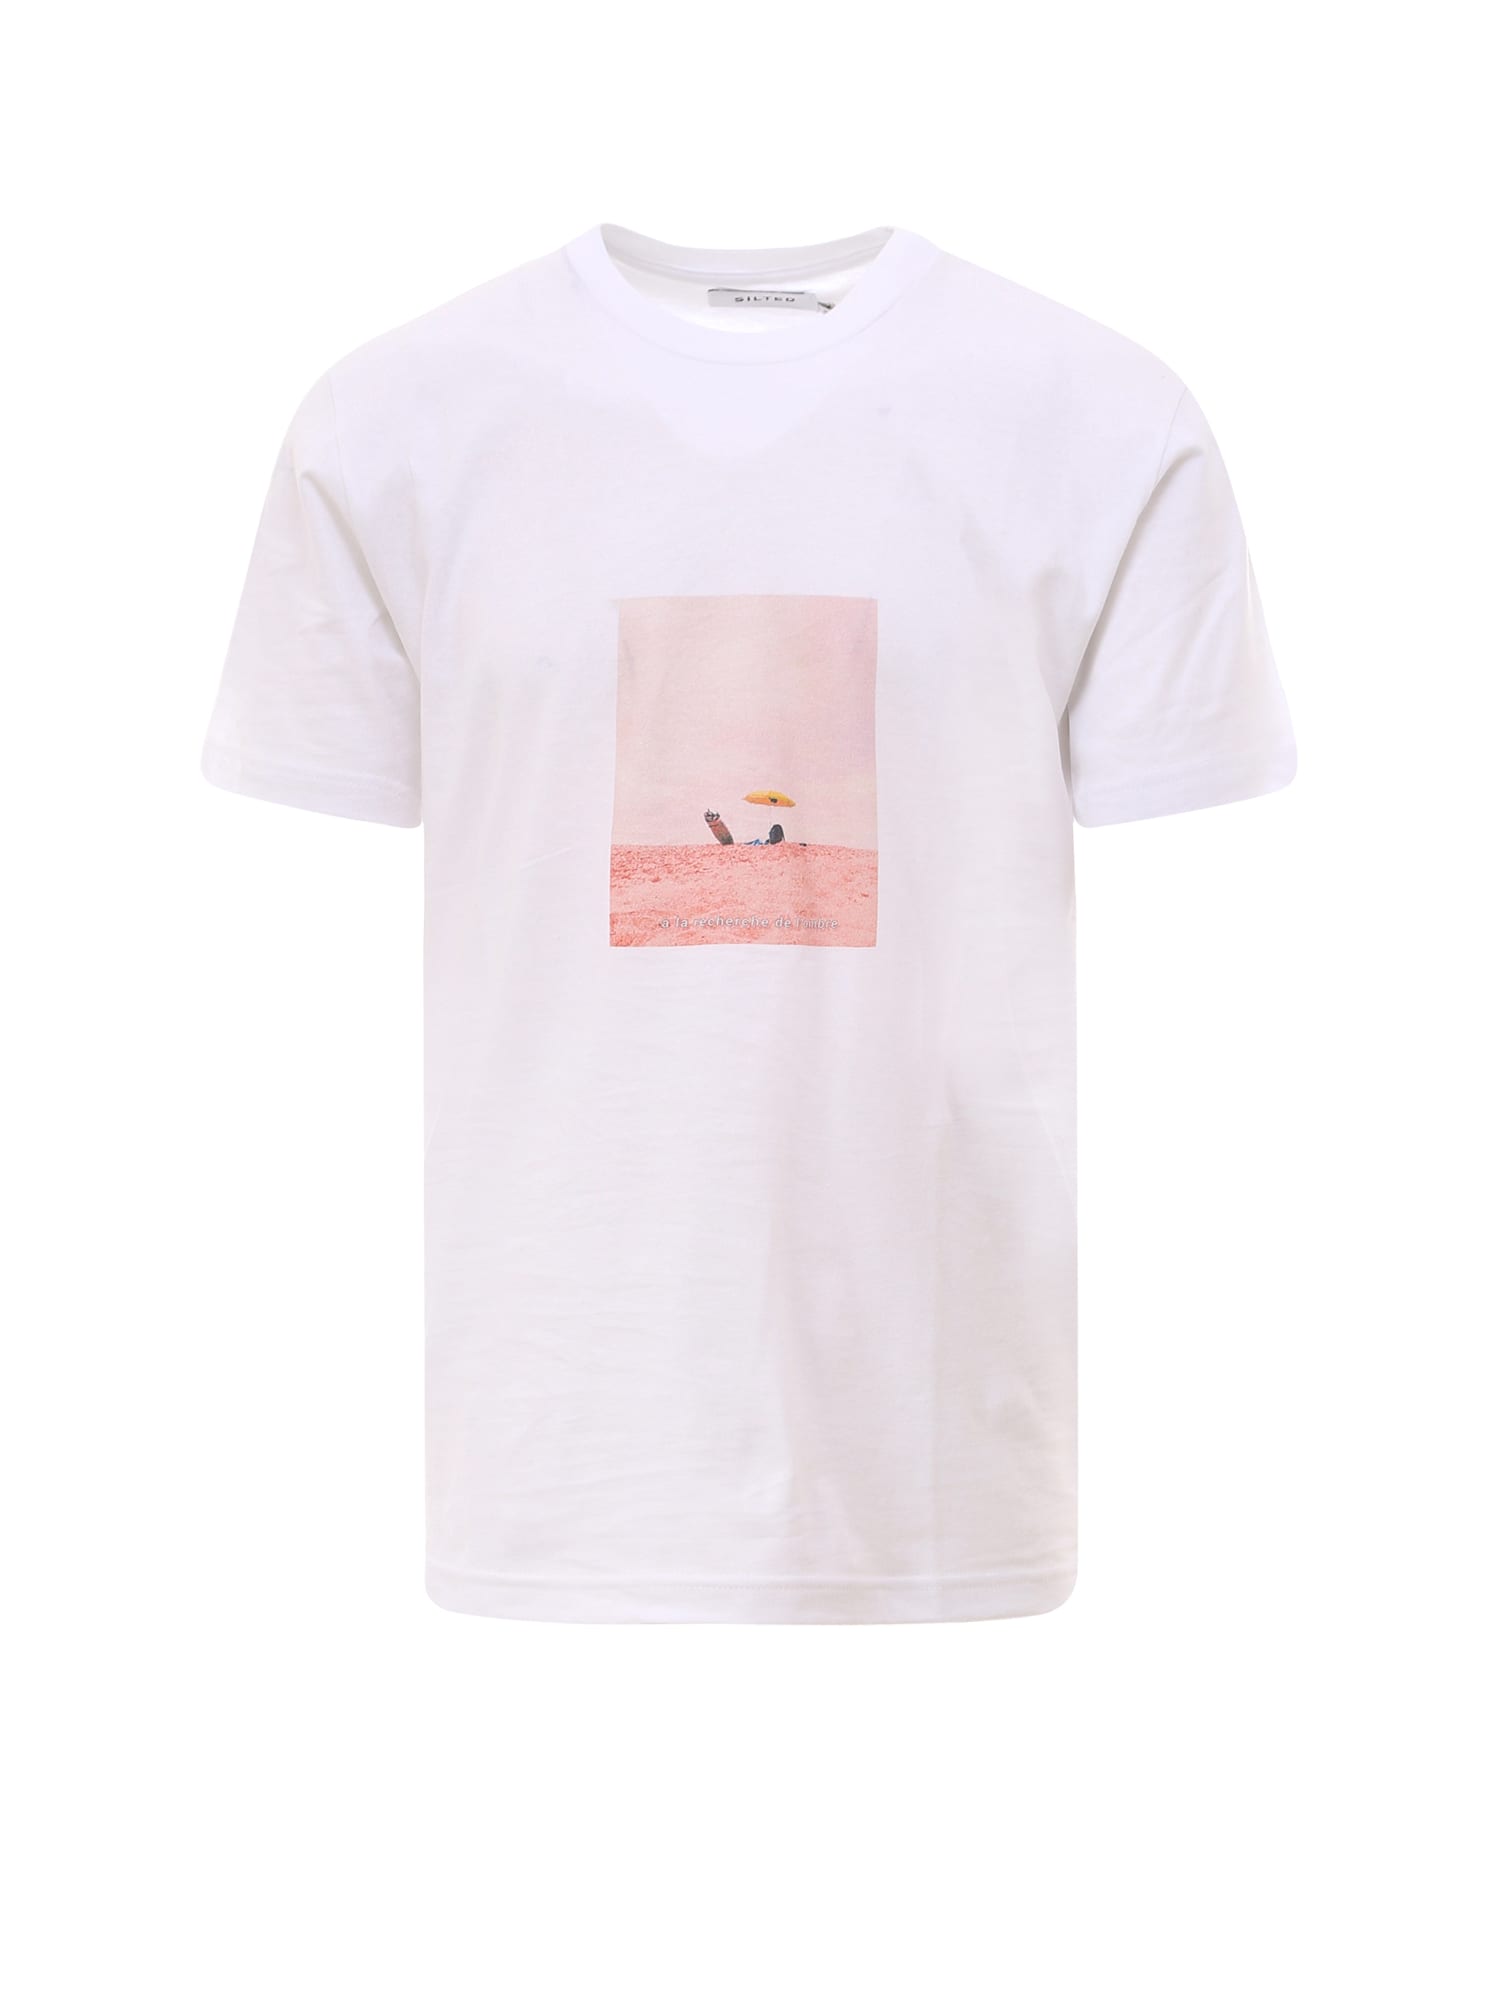 SILTED T-SHIRT,TSPHWH WHITE